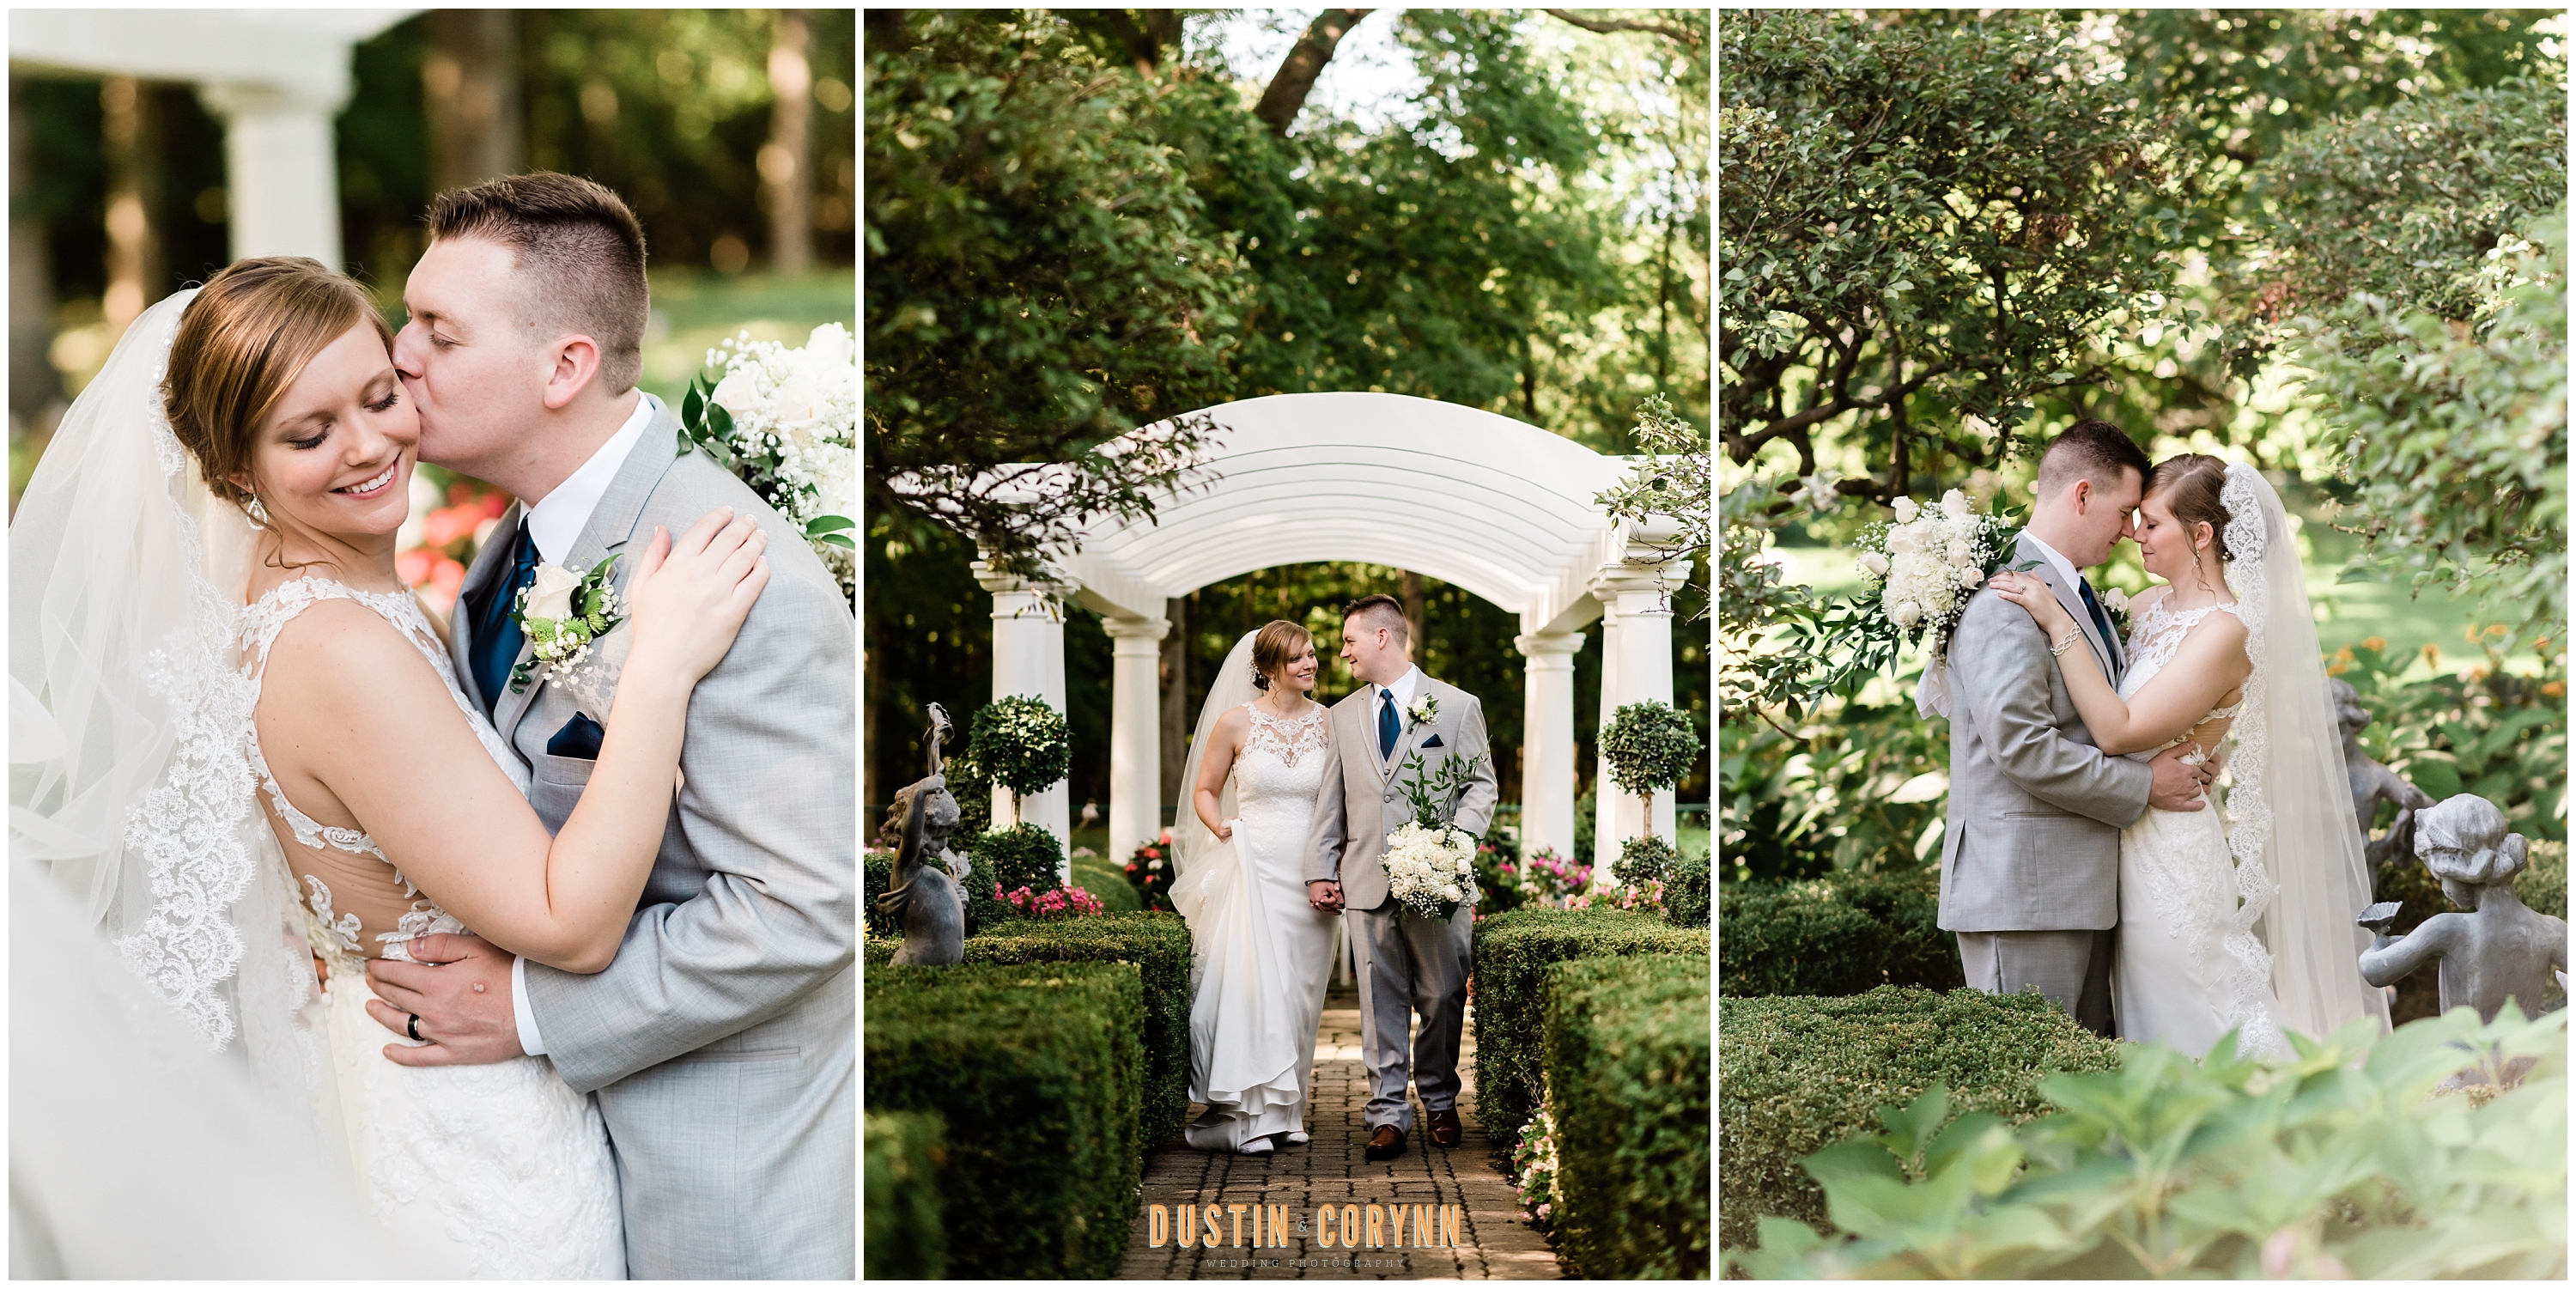 Bride and Groom in the Gardens at Portraits at Orchard Ridge Country Club